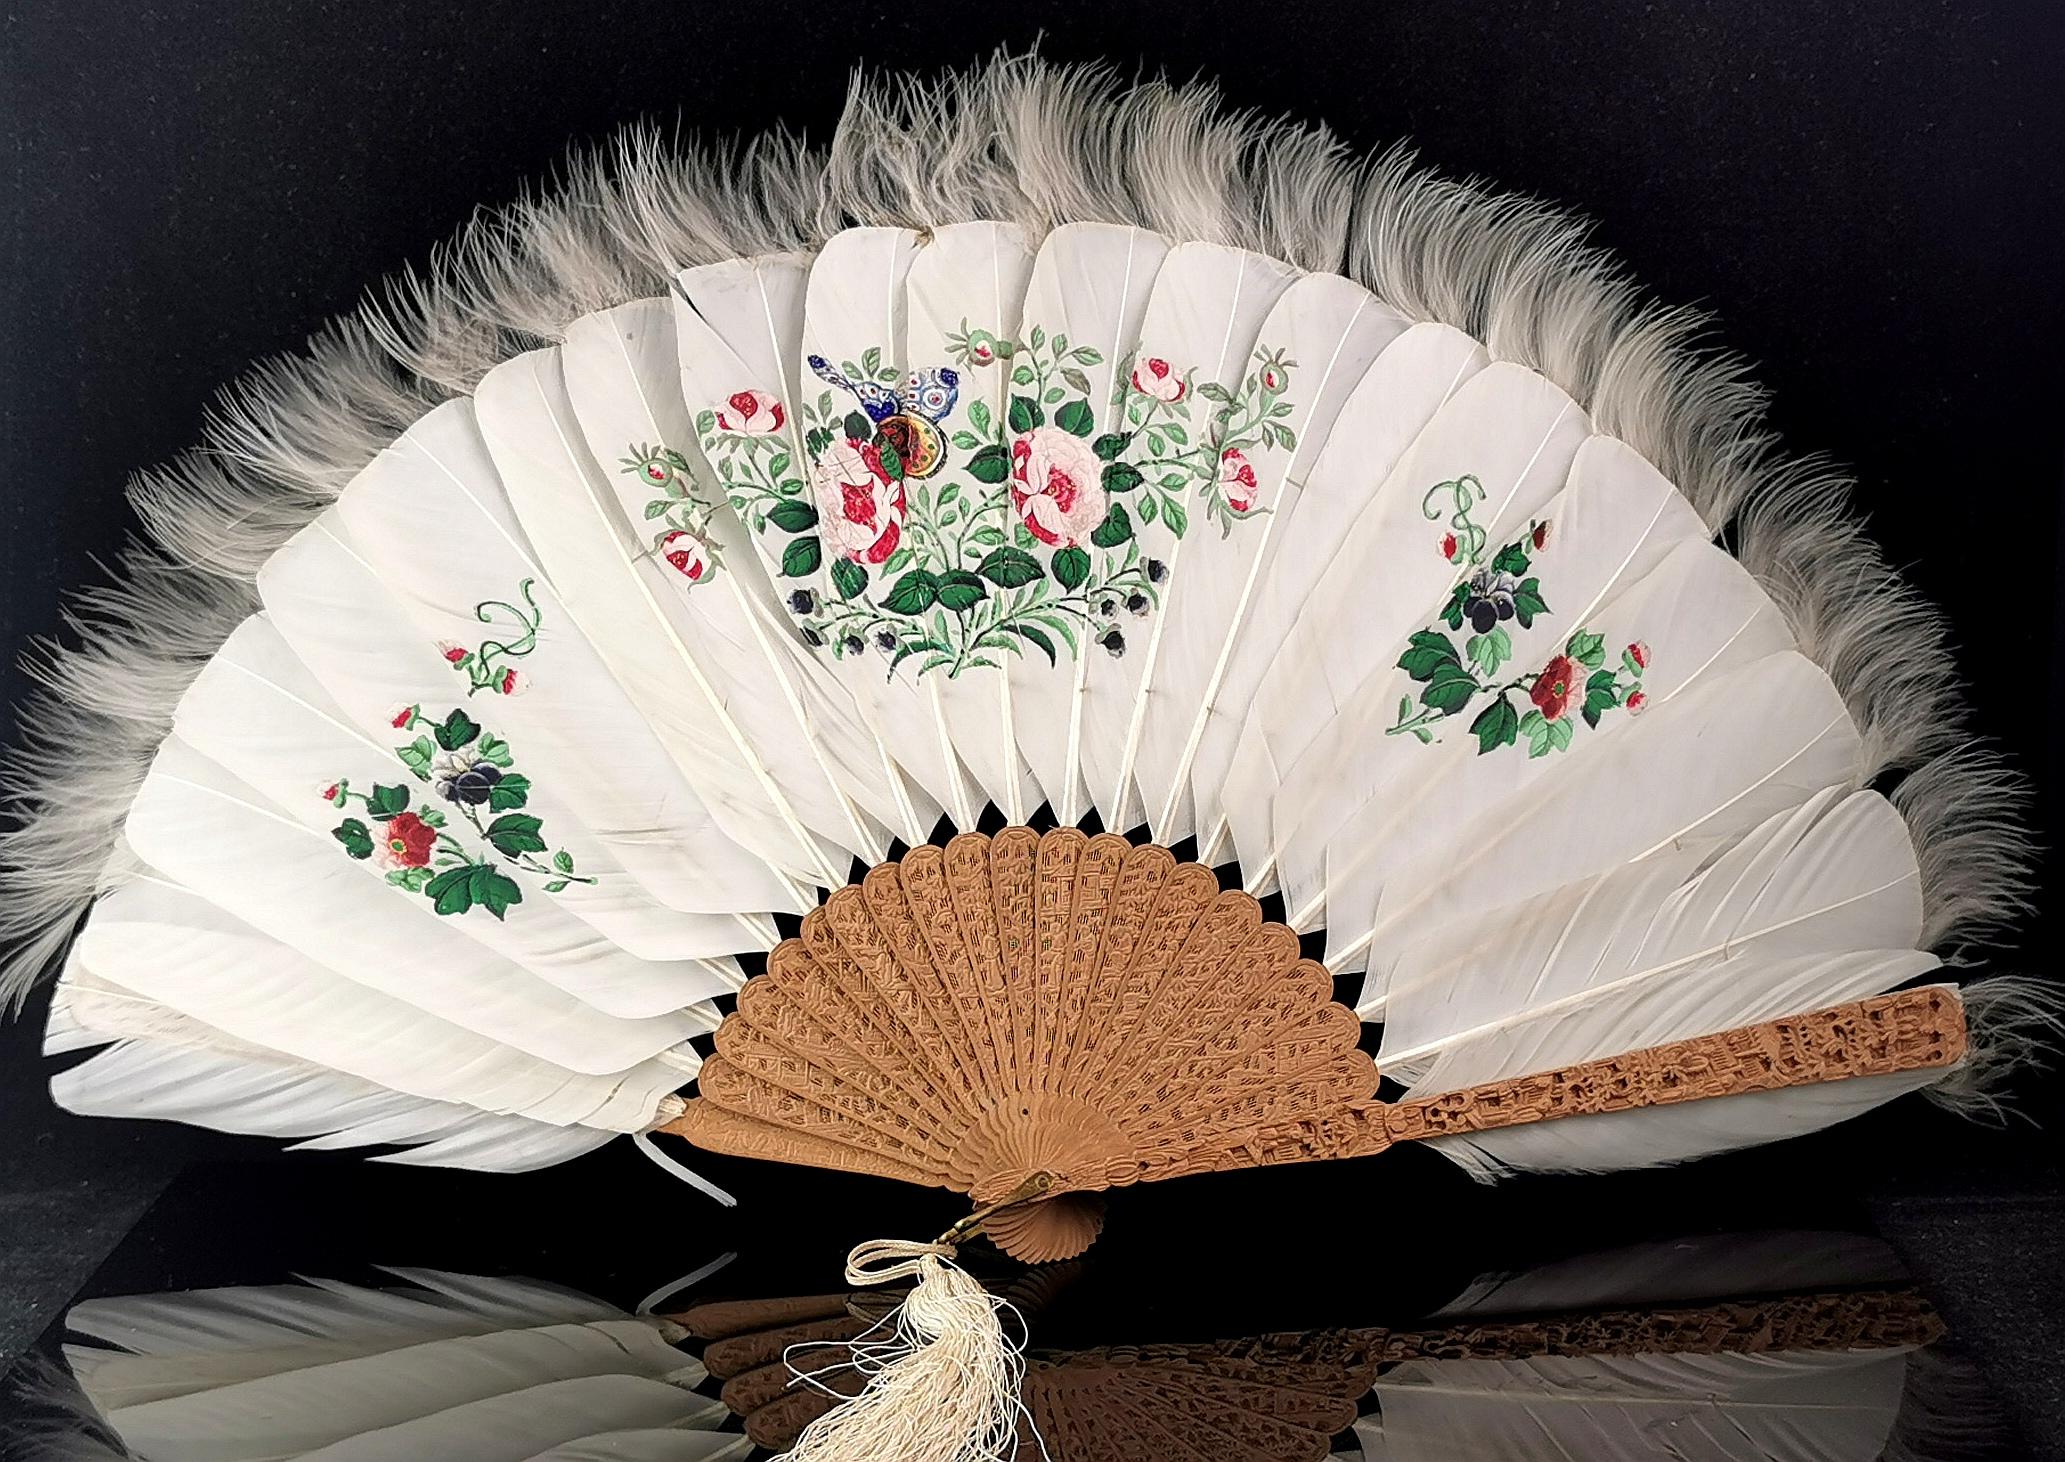 A beautiful antique, Art Deco era Chinese feather and silk hand fan.

The fan is made from off white coloured feathers with tufty edges and silk, attached to bamboo sticks and finely carved wooden guards.

The feathers have a gorgeous hand painted